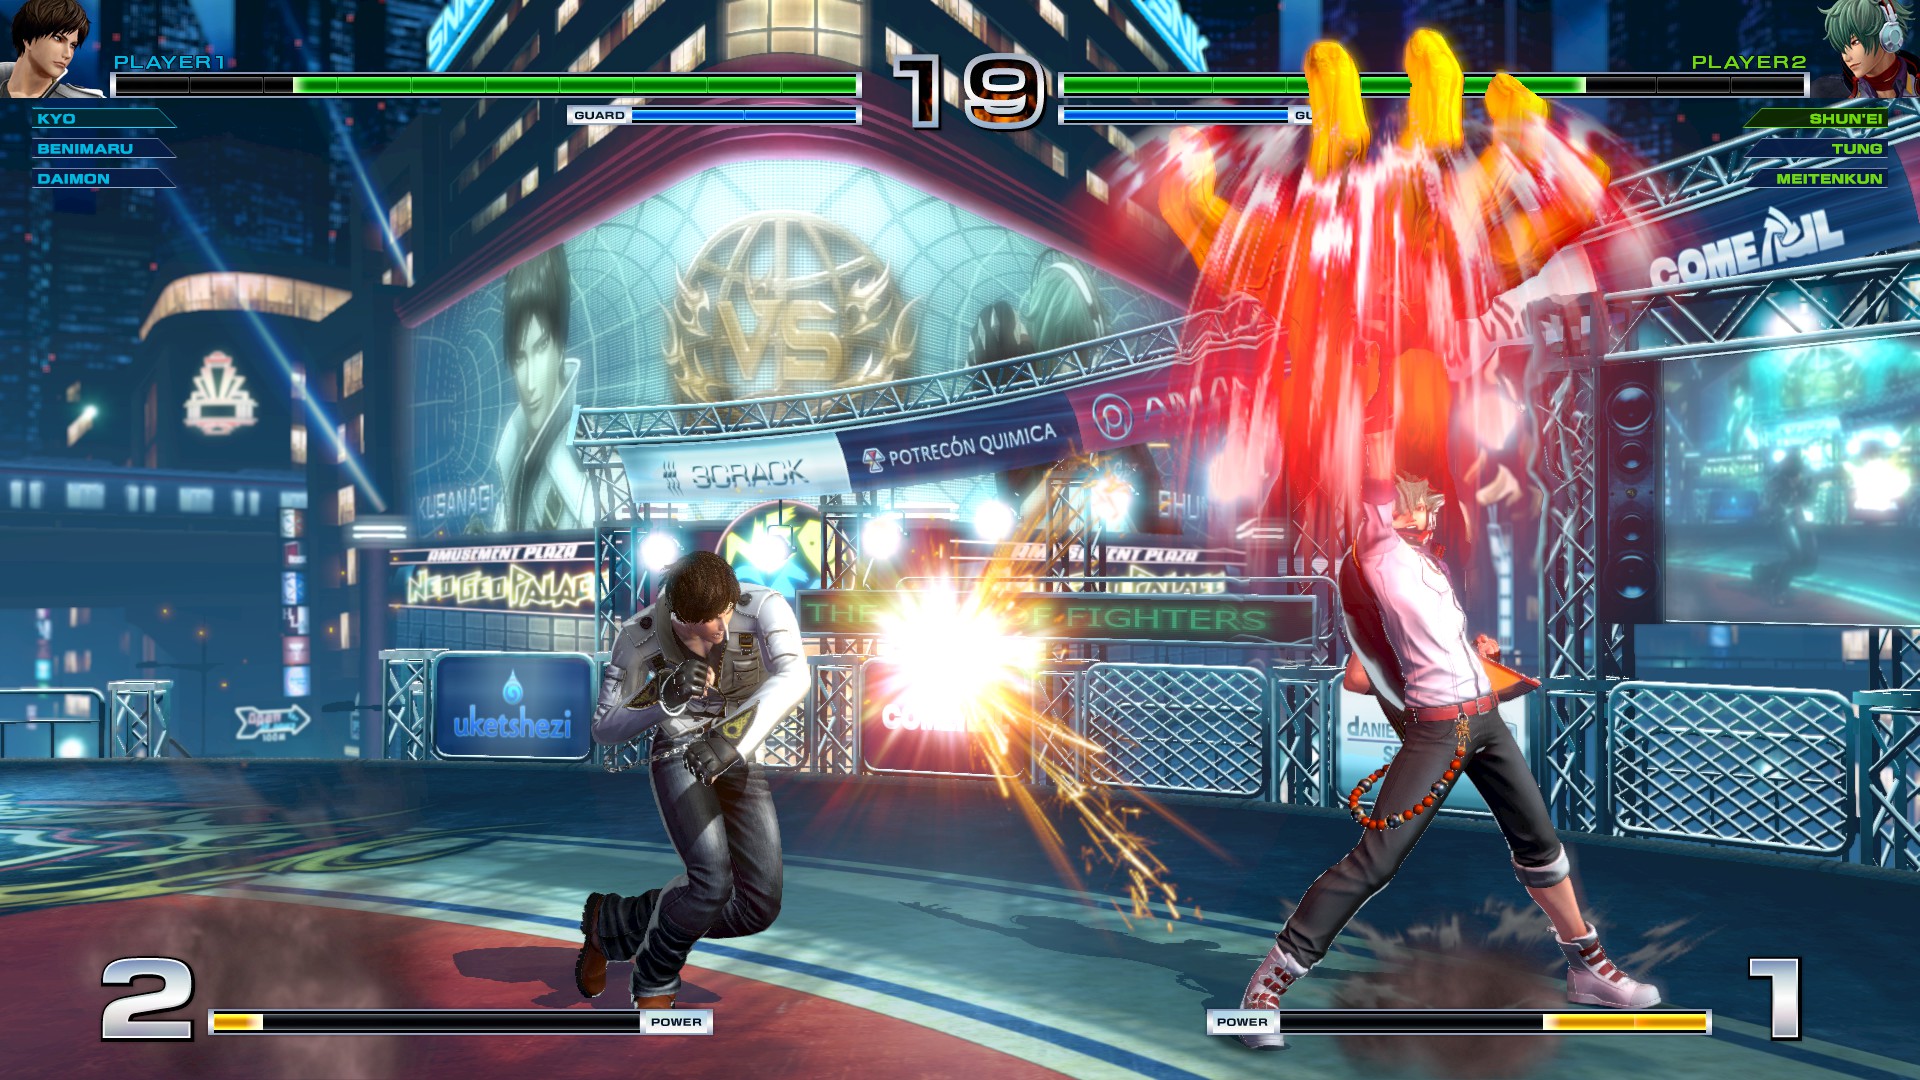 the king of fighters xv steam